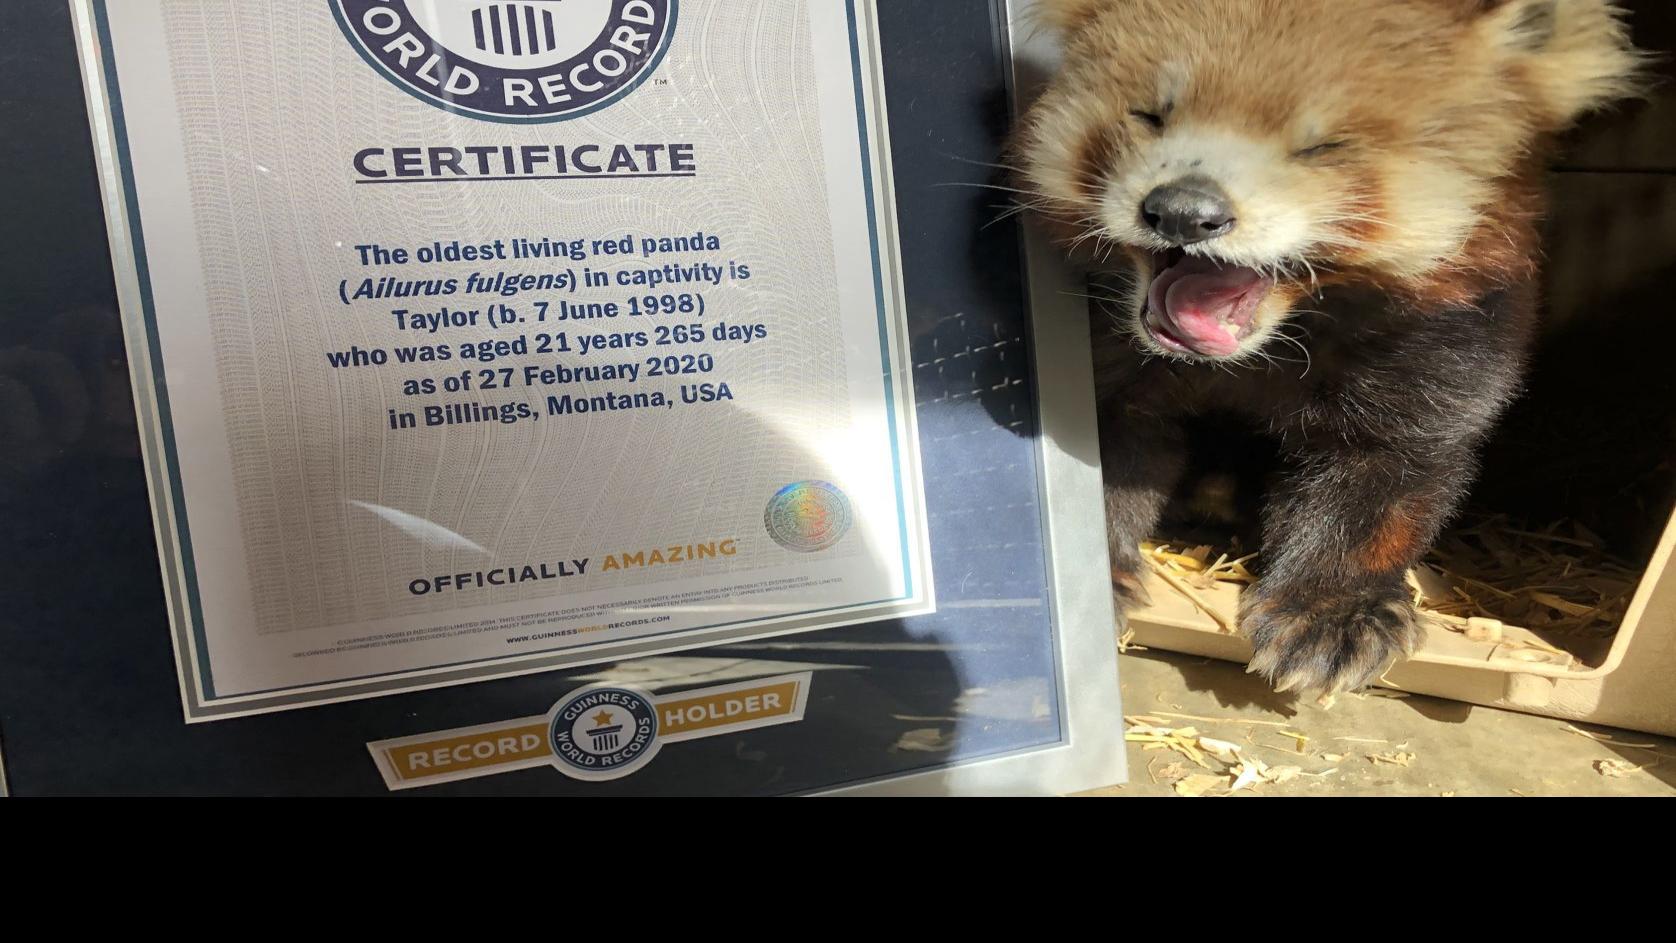 Zoomontana S Red Panda Breaks Record For Oldest Before Being Found Dead Wednesday Local News Billingsgazette Com